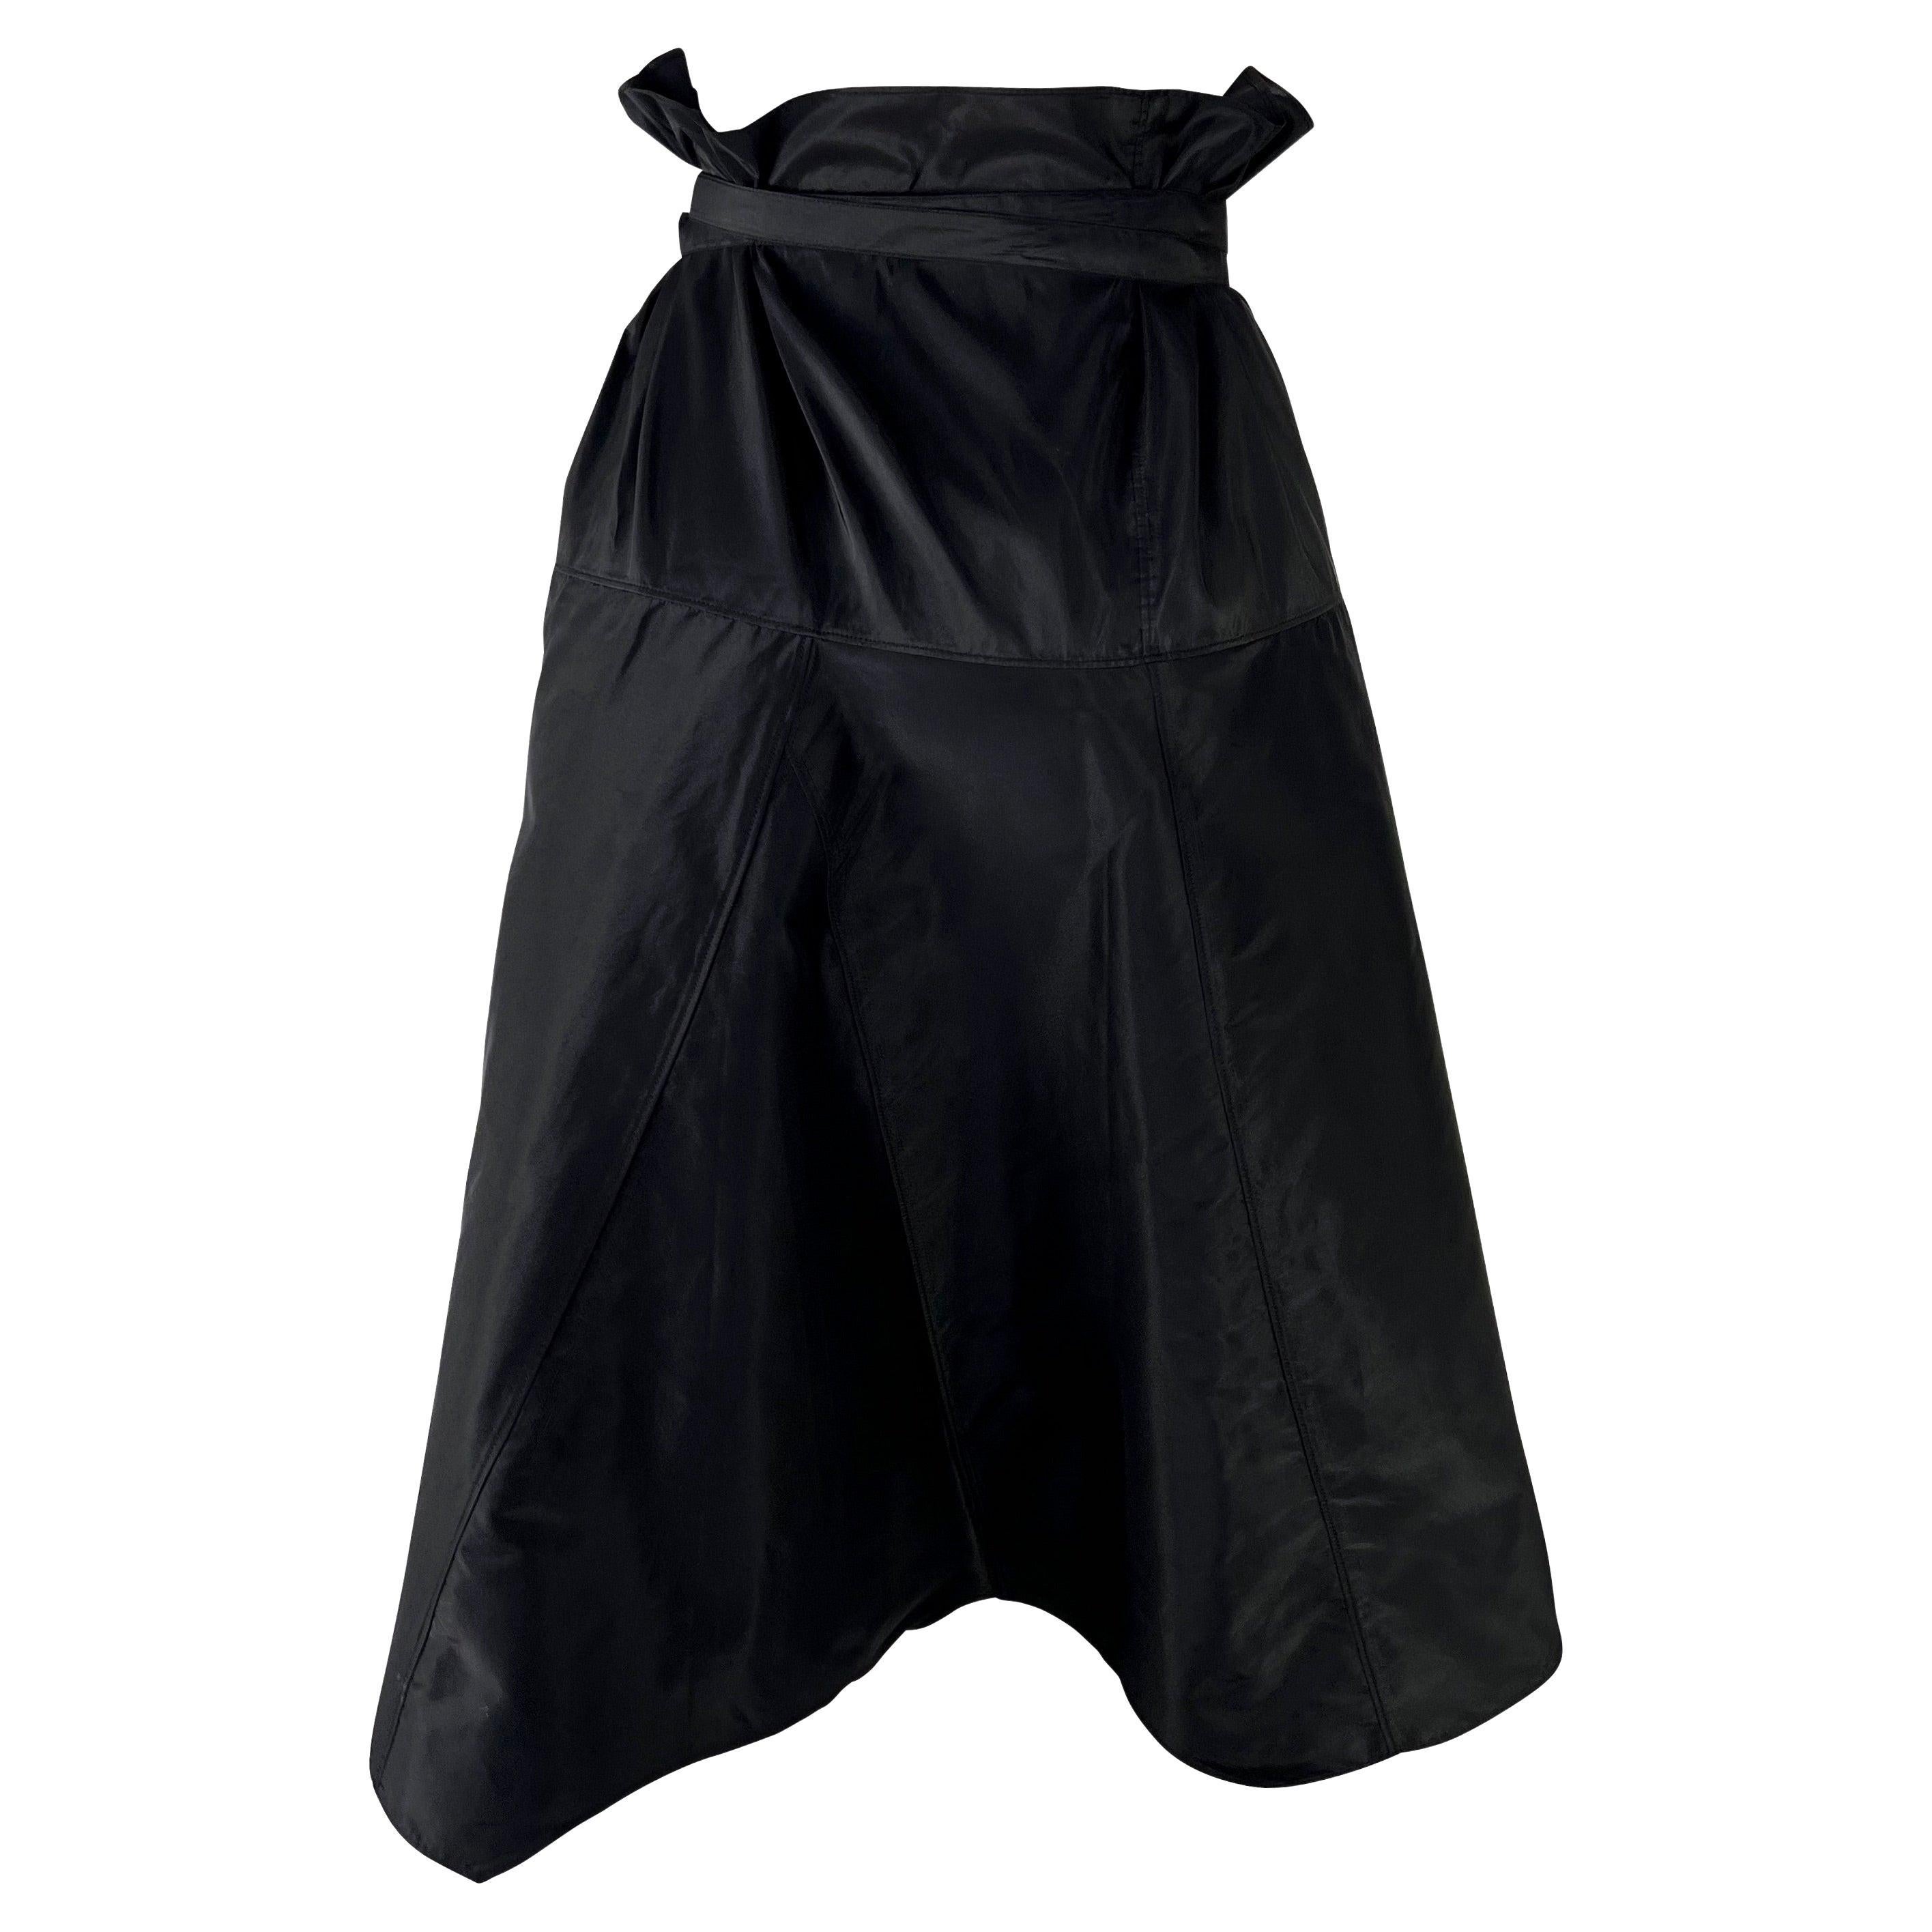 S/S 2002 Gucci by Tom Ford Runway Black Silk Taffeta Belted Wrap Oversized Skirt For Sale 3